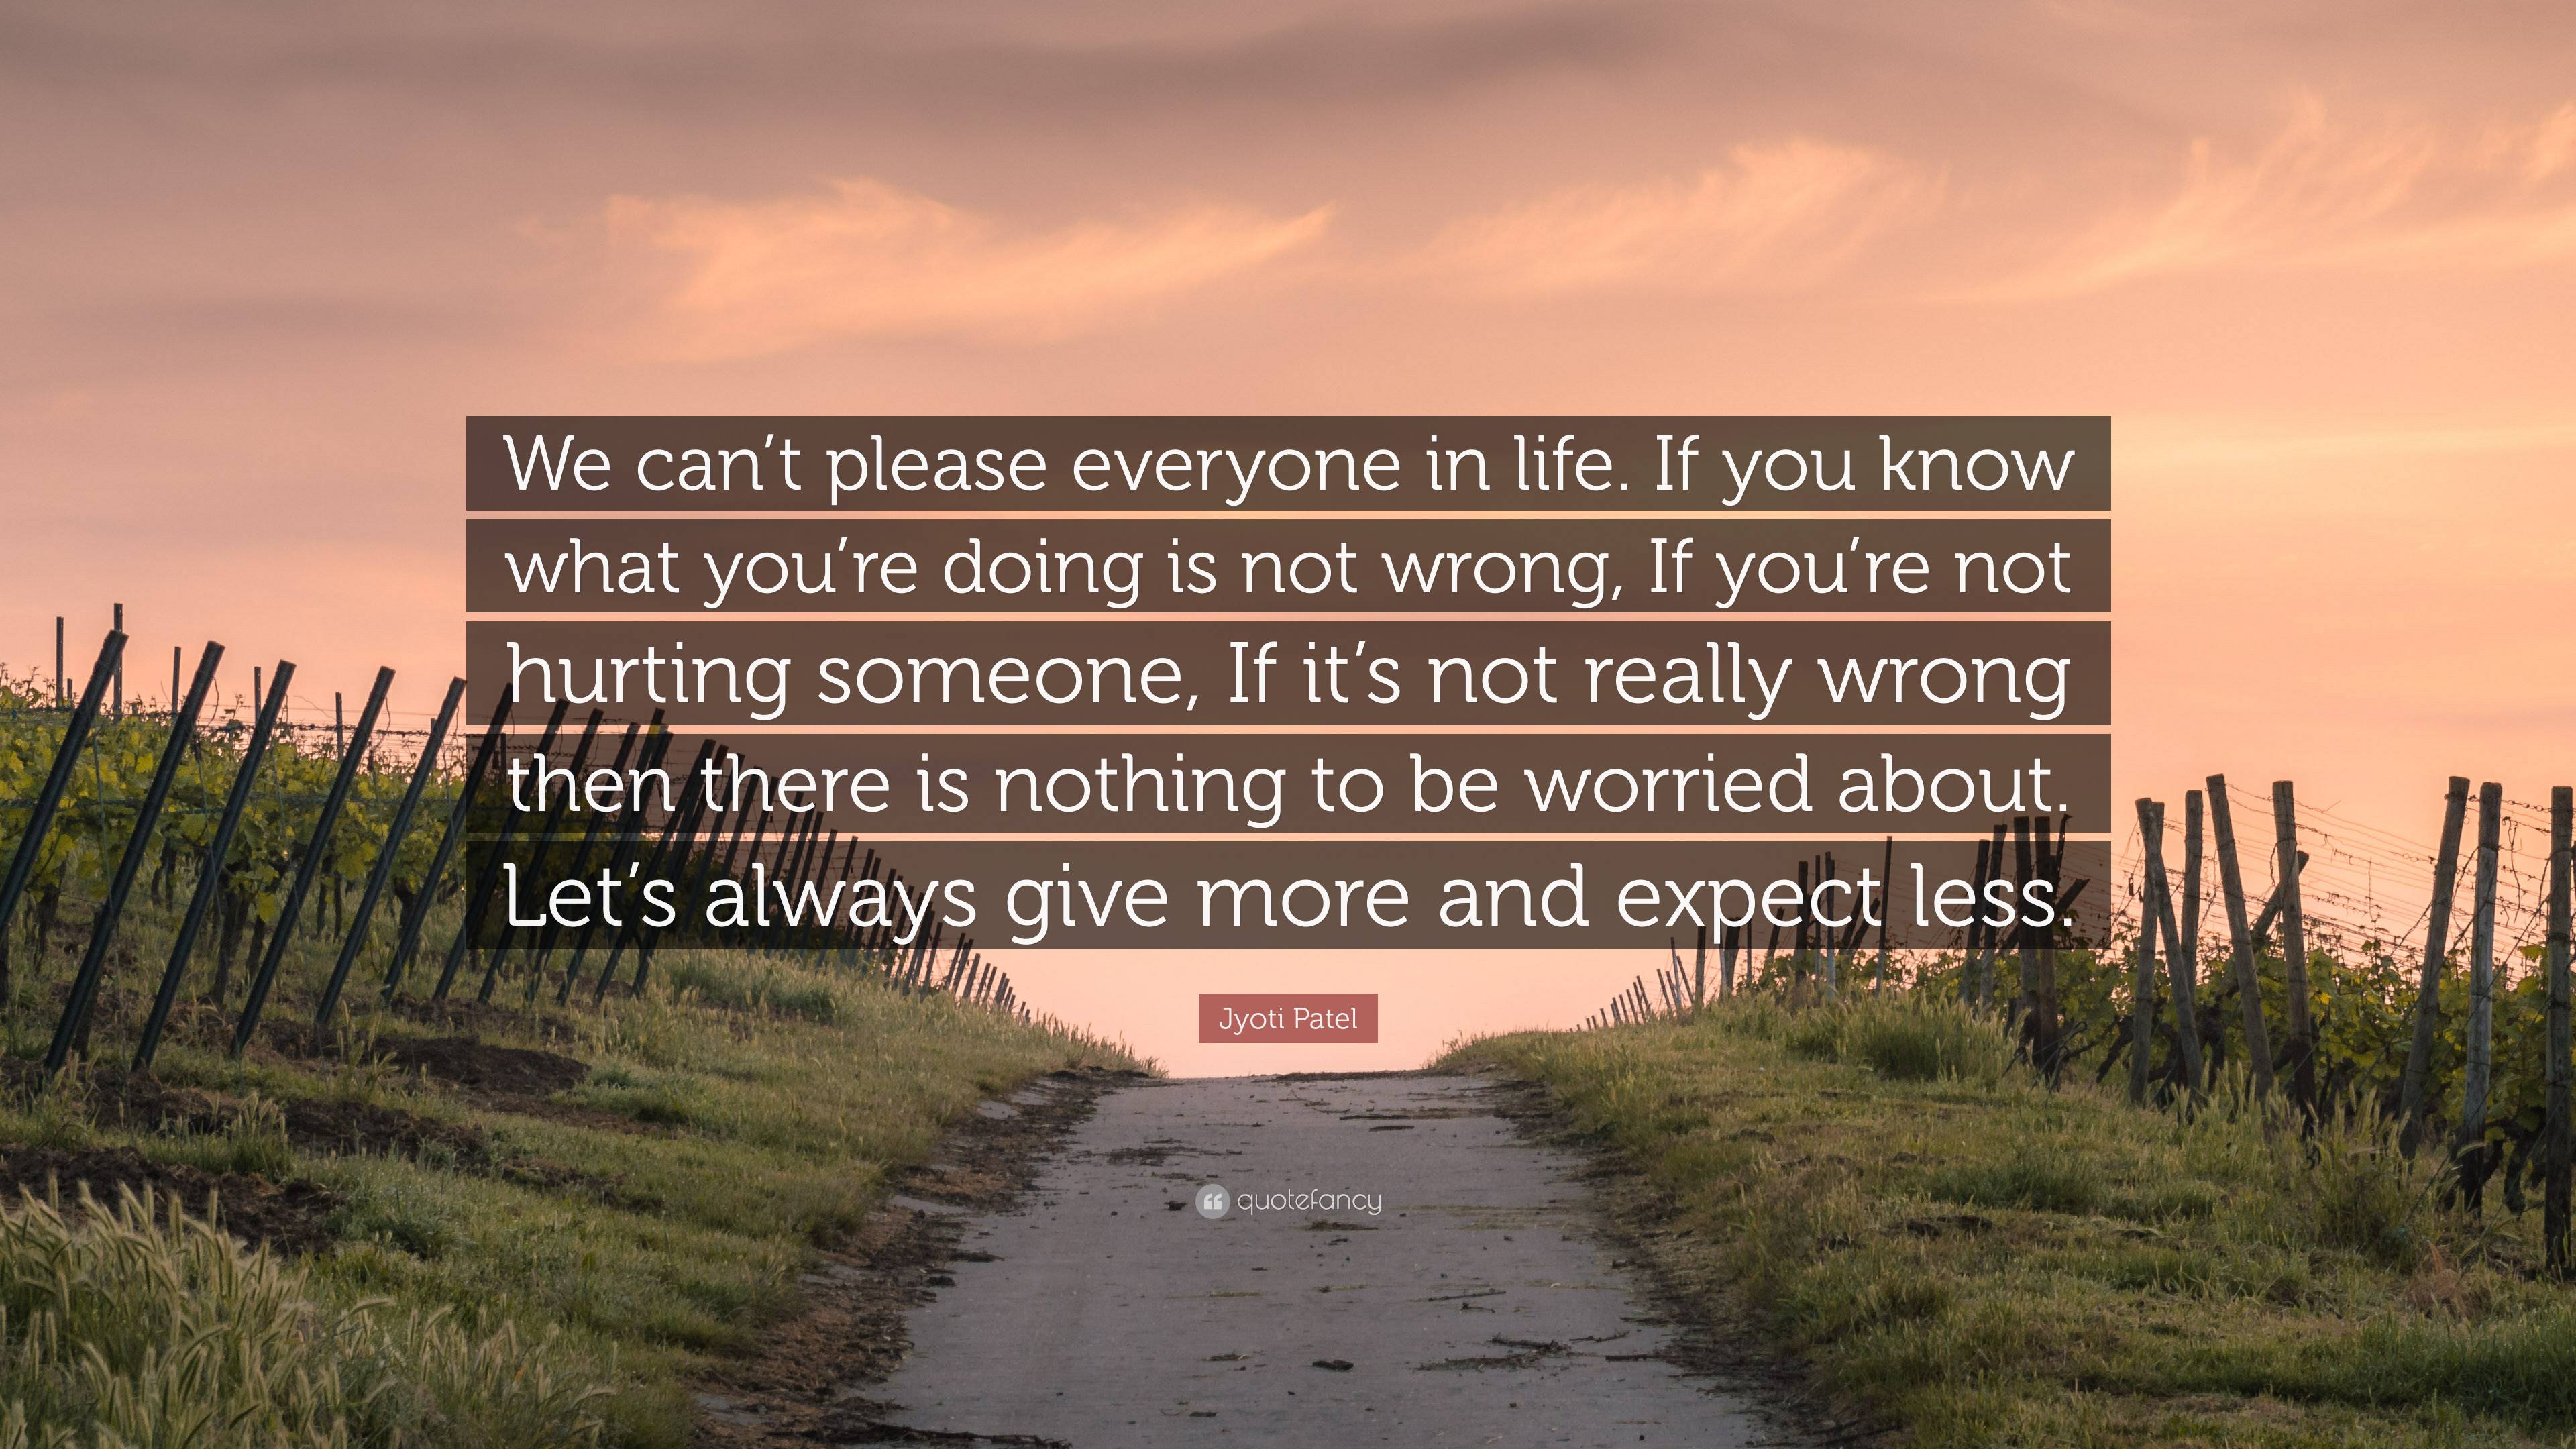 Can't please everyone …  Quotes, True quotes, Quotes to live by